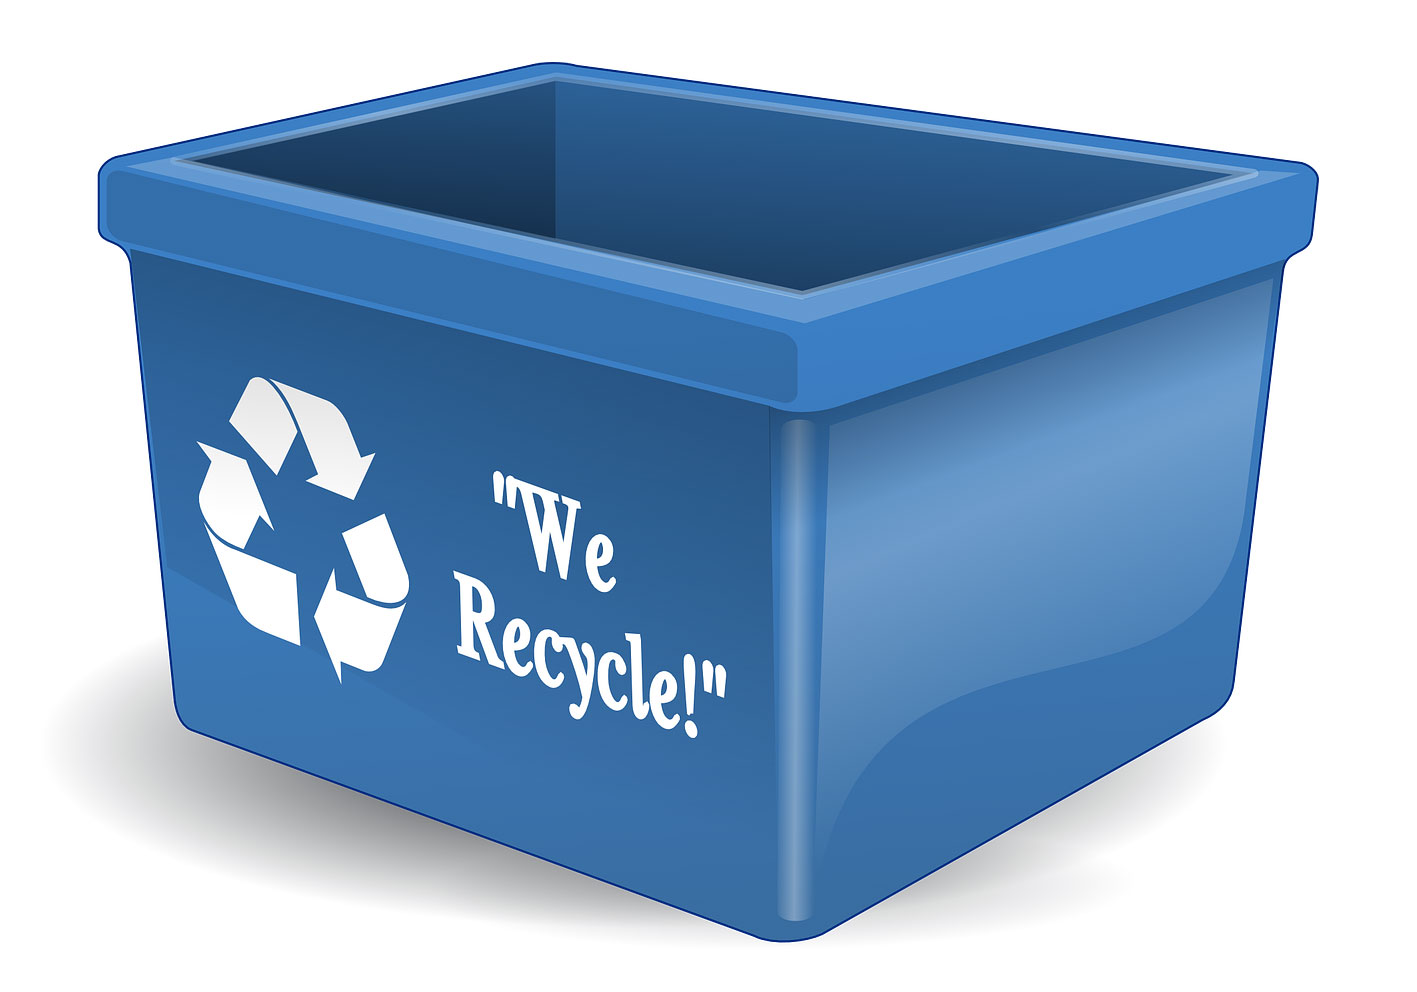 Helpful Tips to Reduce Your Household Waste